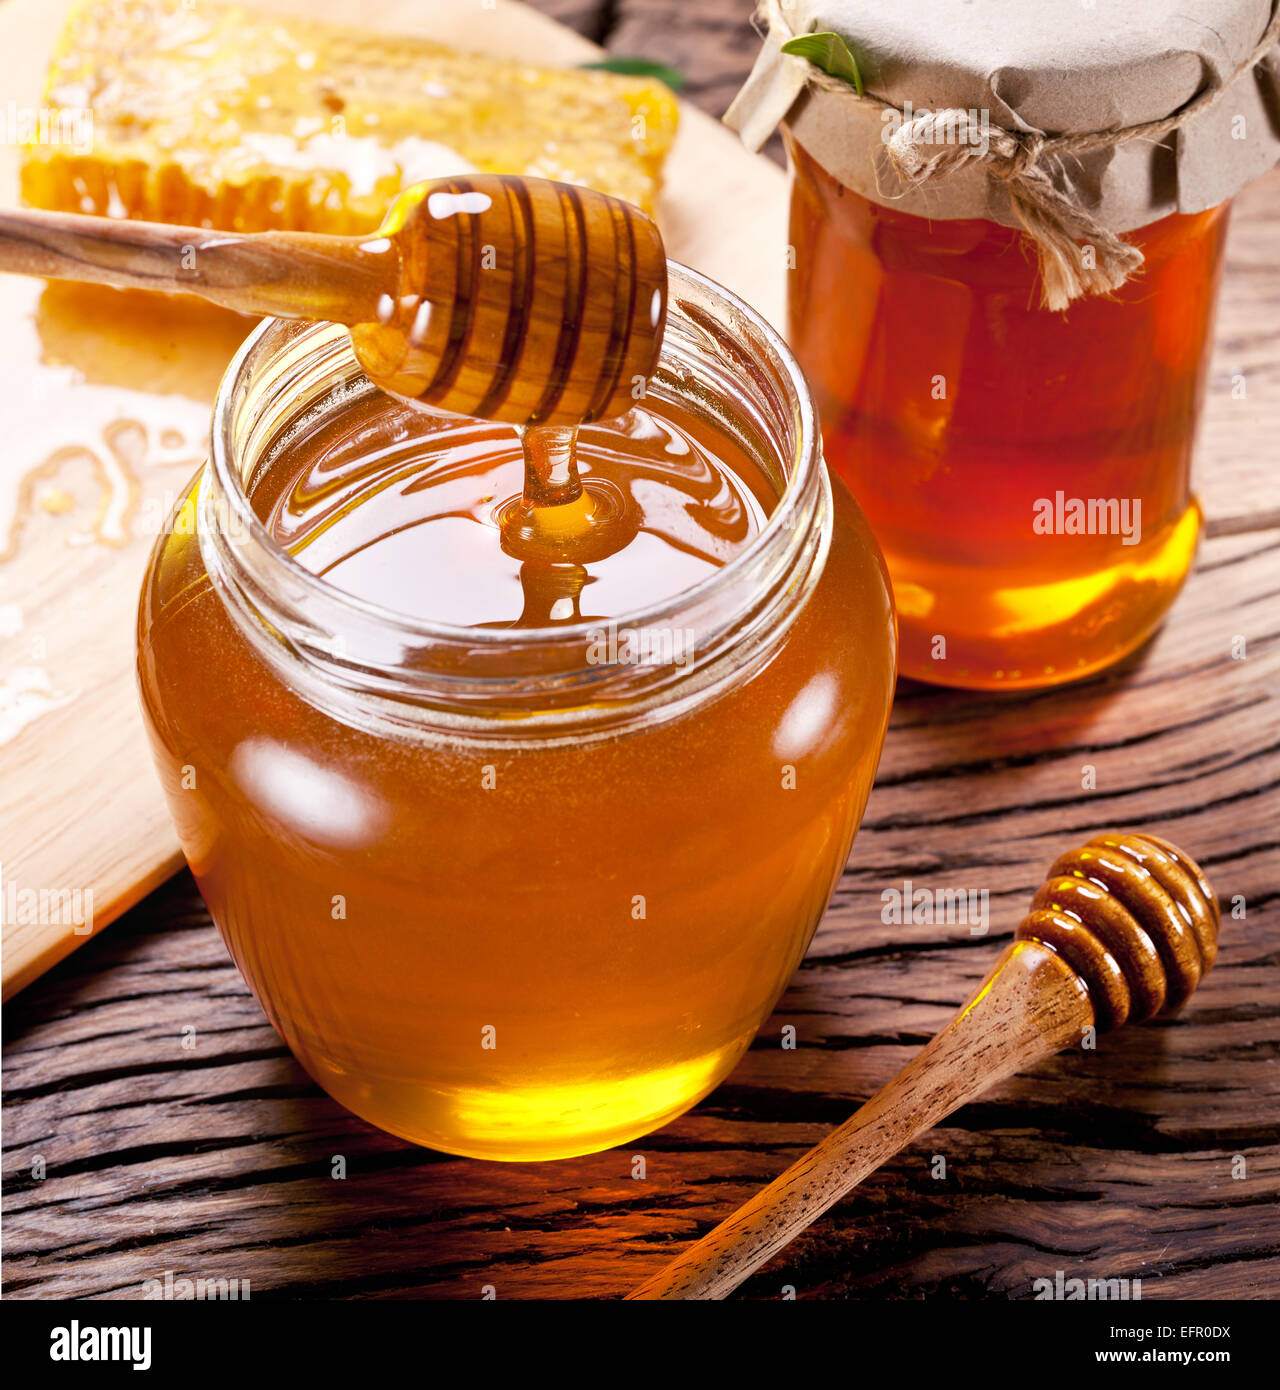 Honey dripping from wooden spoon into glass can. Stock Photo